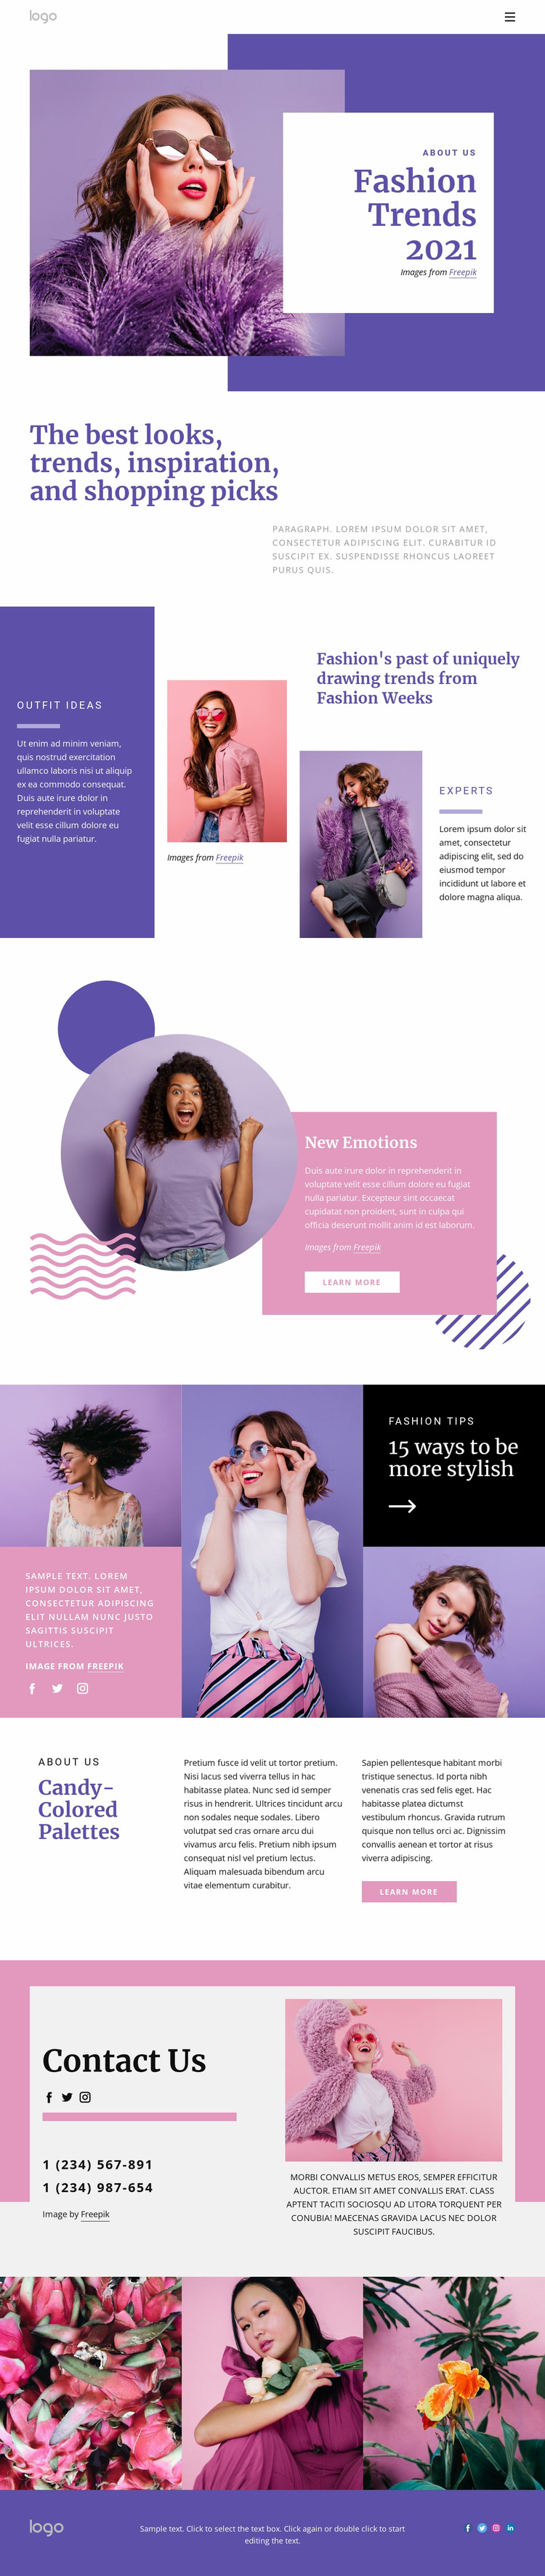 Get the hottest styles Website Builder Templates